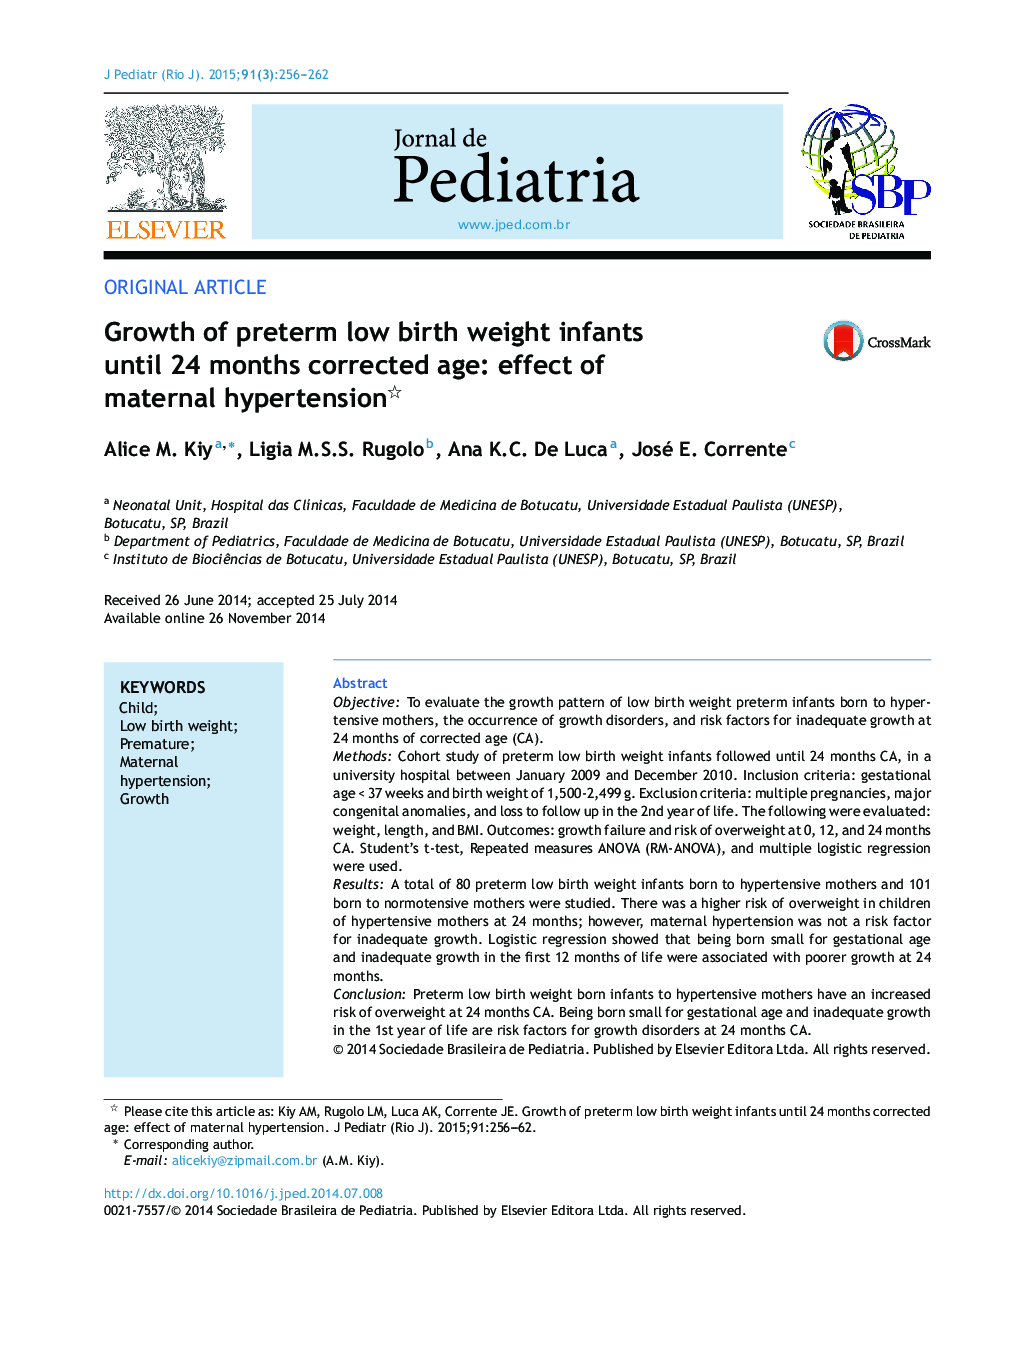 Growth of preterm low birth weight infants until 24 months corrected age: effect of maternal hypertension 